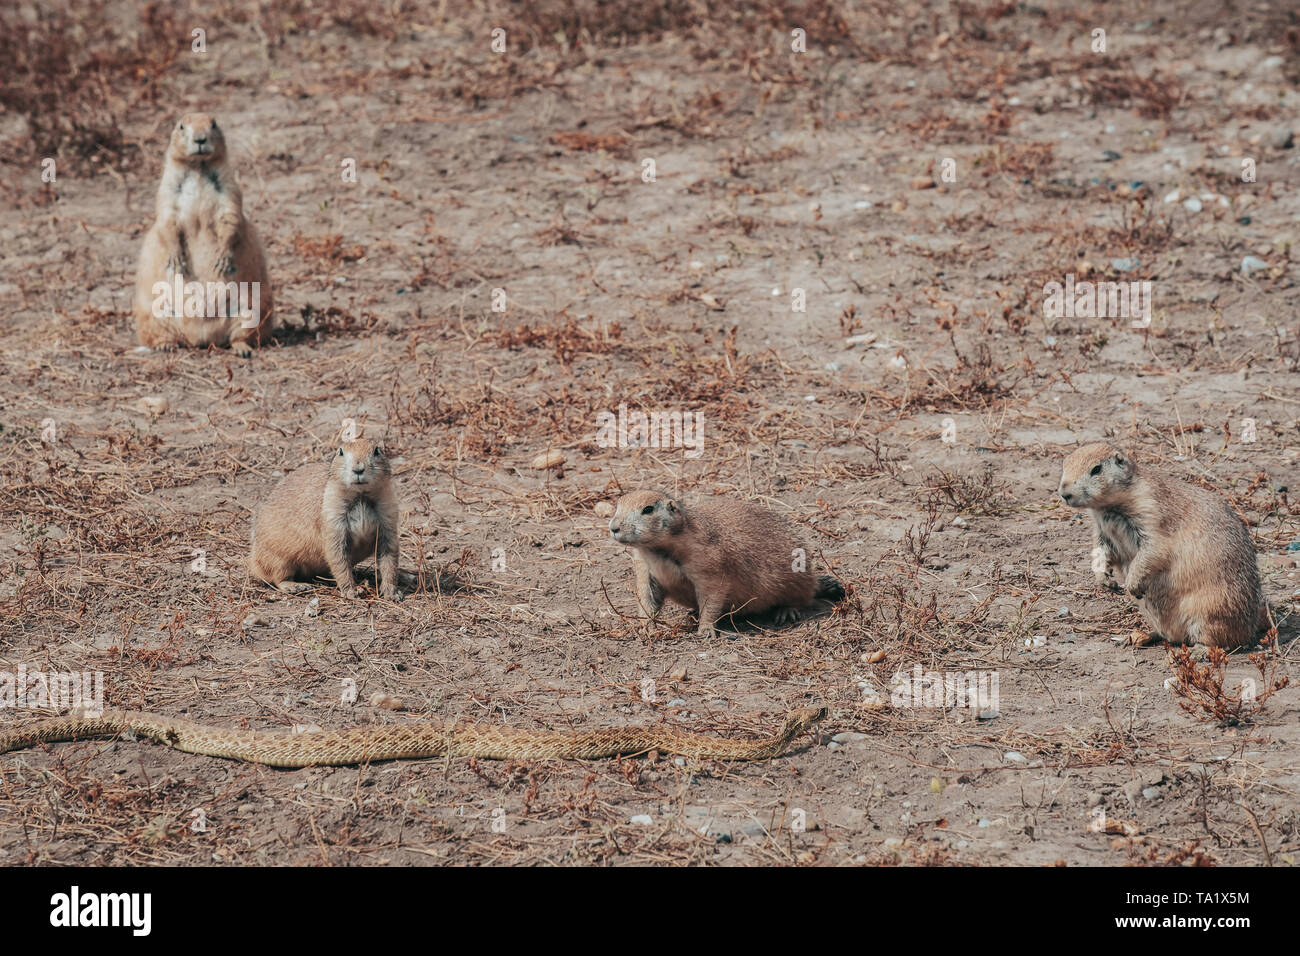 Prairie Dogs, a burrowing rodent, trying to keep a rattlesnake away from their underground burrows in Badlands National Park, South Dakota, USA Stock Photo